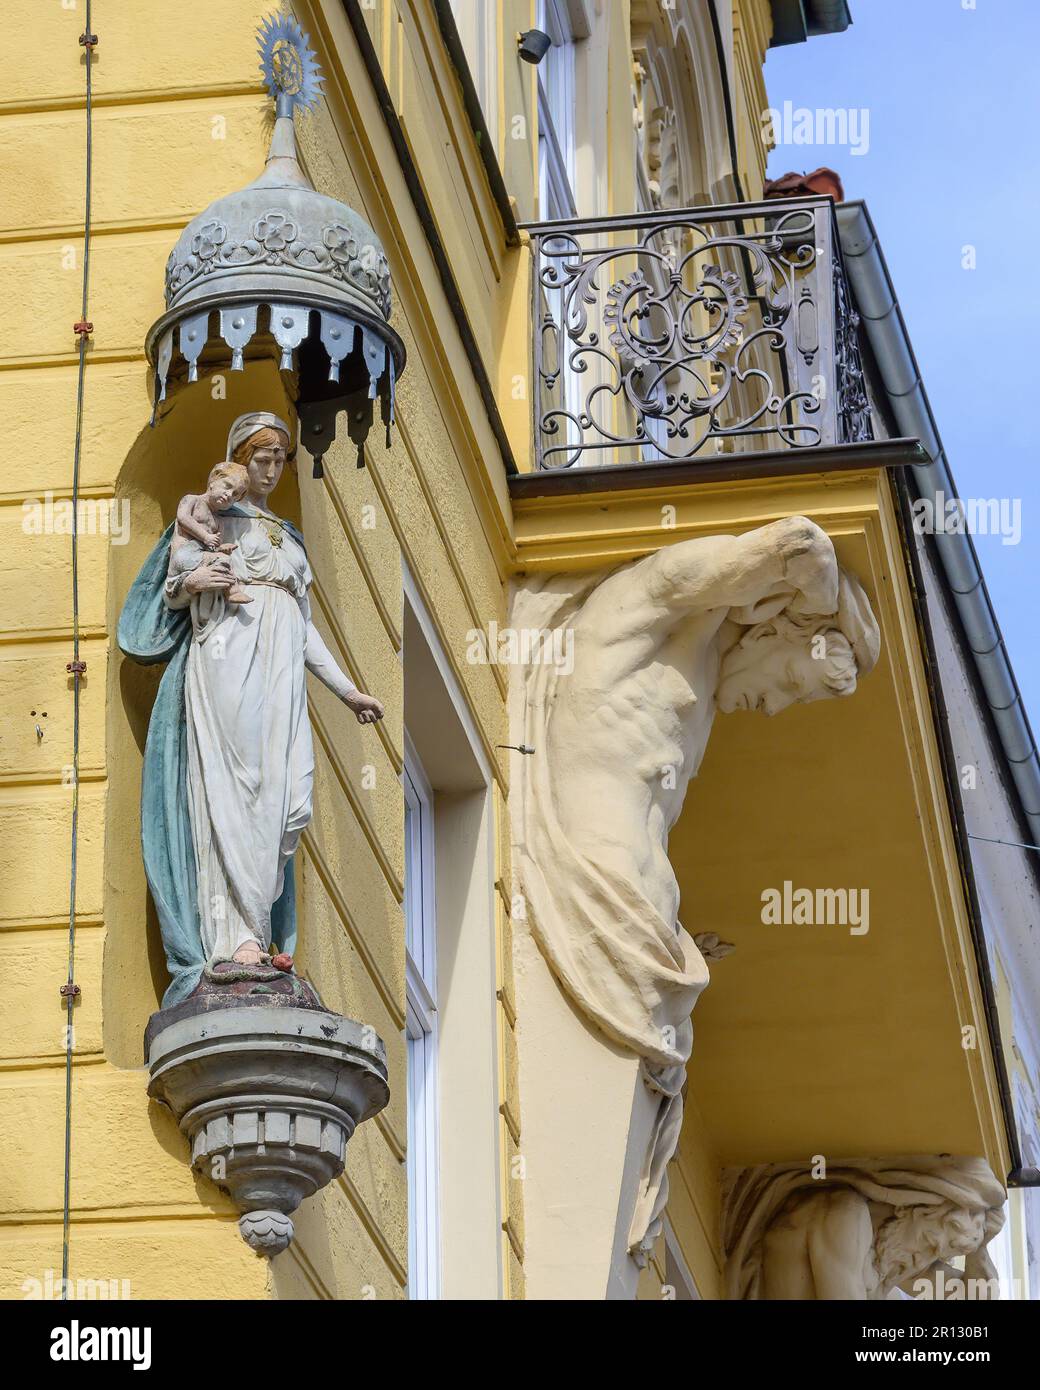 Sculpture of Madonna with her child Jesus. Ornamentation on building in the old town of Landshut, Lower Bavaria, Germany. Stock Photo